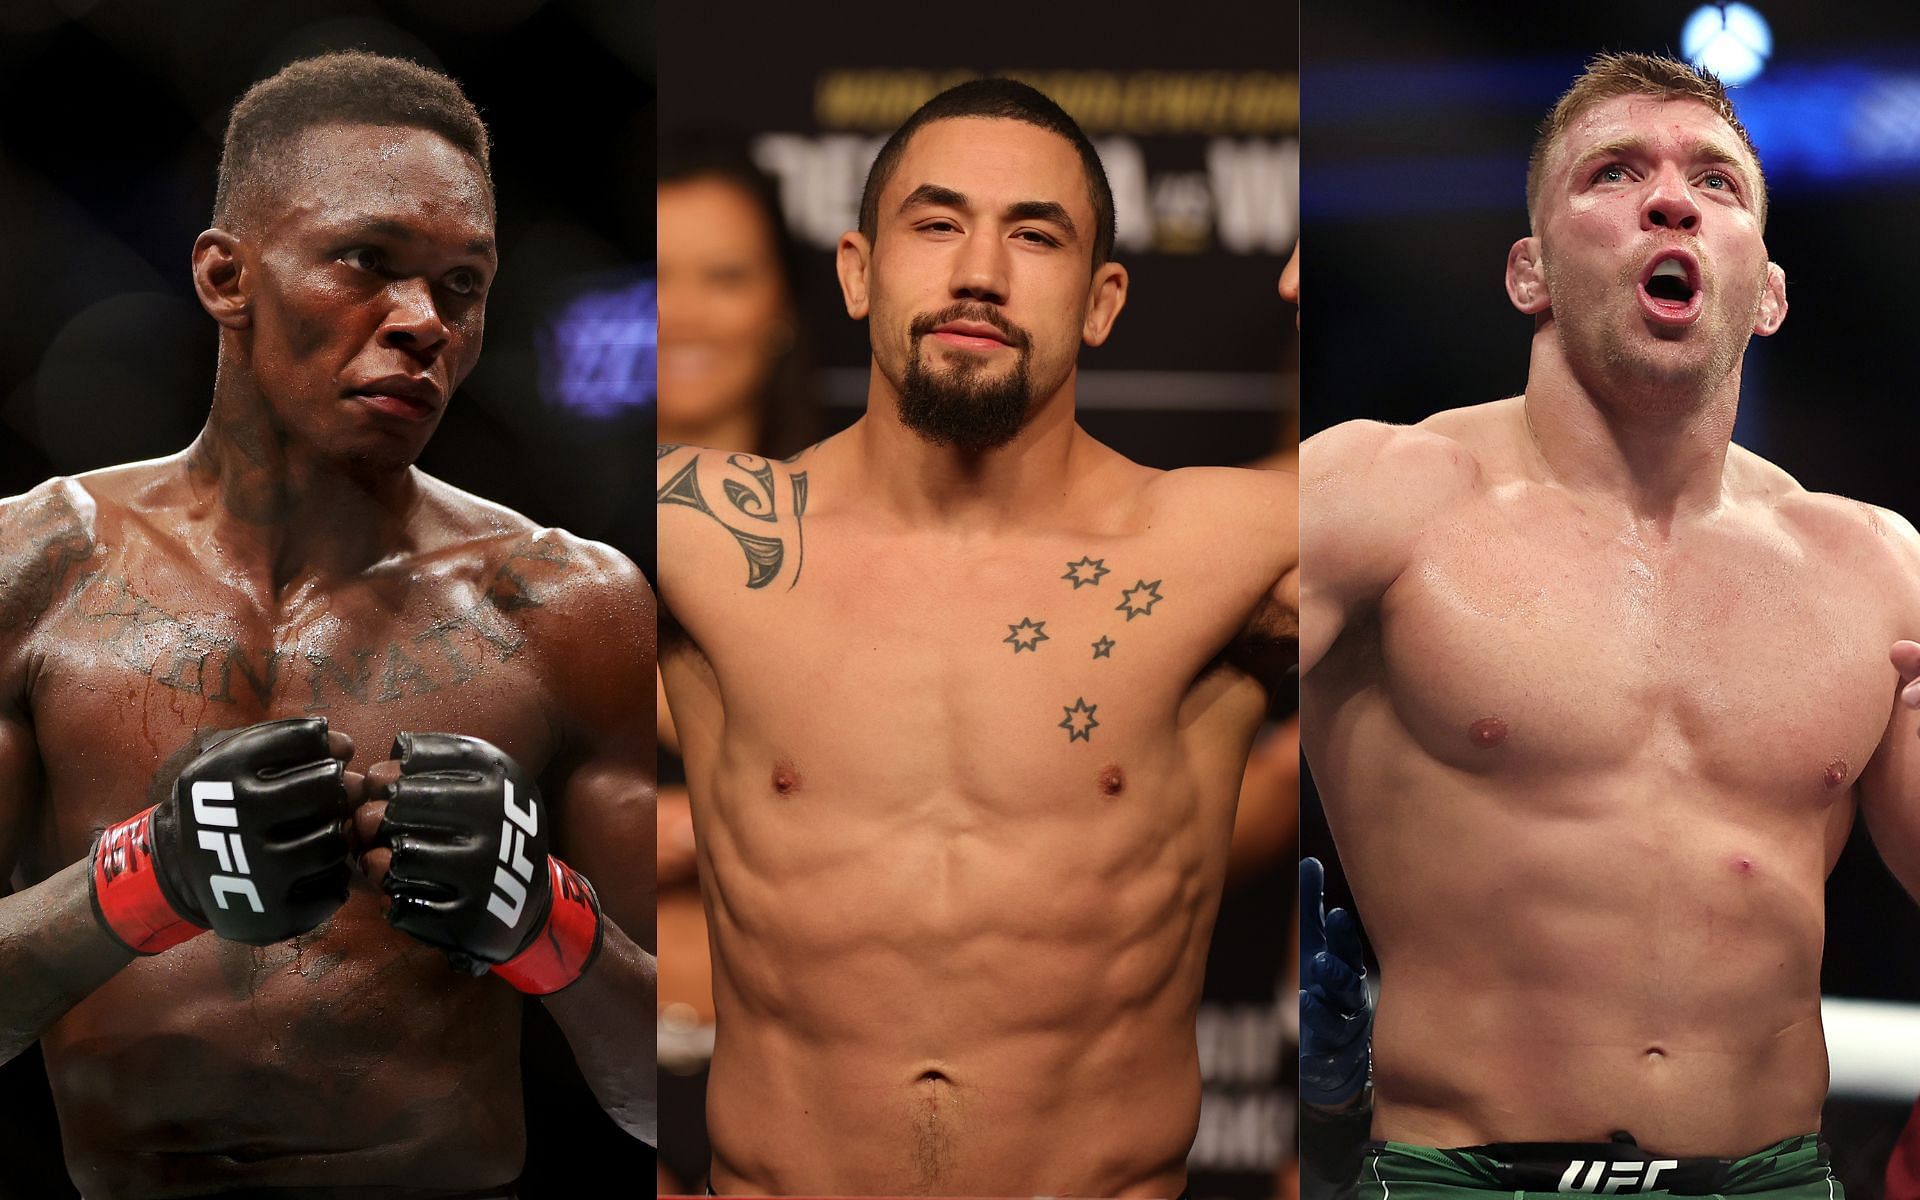 Israel Adesanya (left), Robert Whittaker (center), and Dricus du Plessis (right) (Image credits Getty Images)